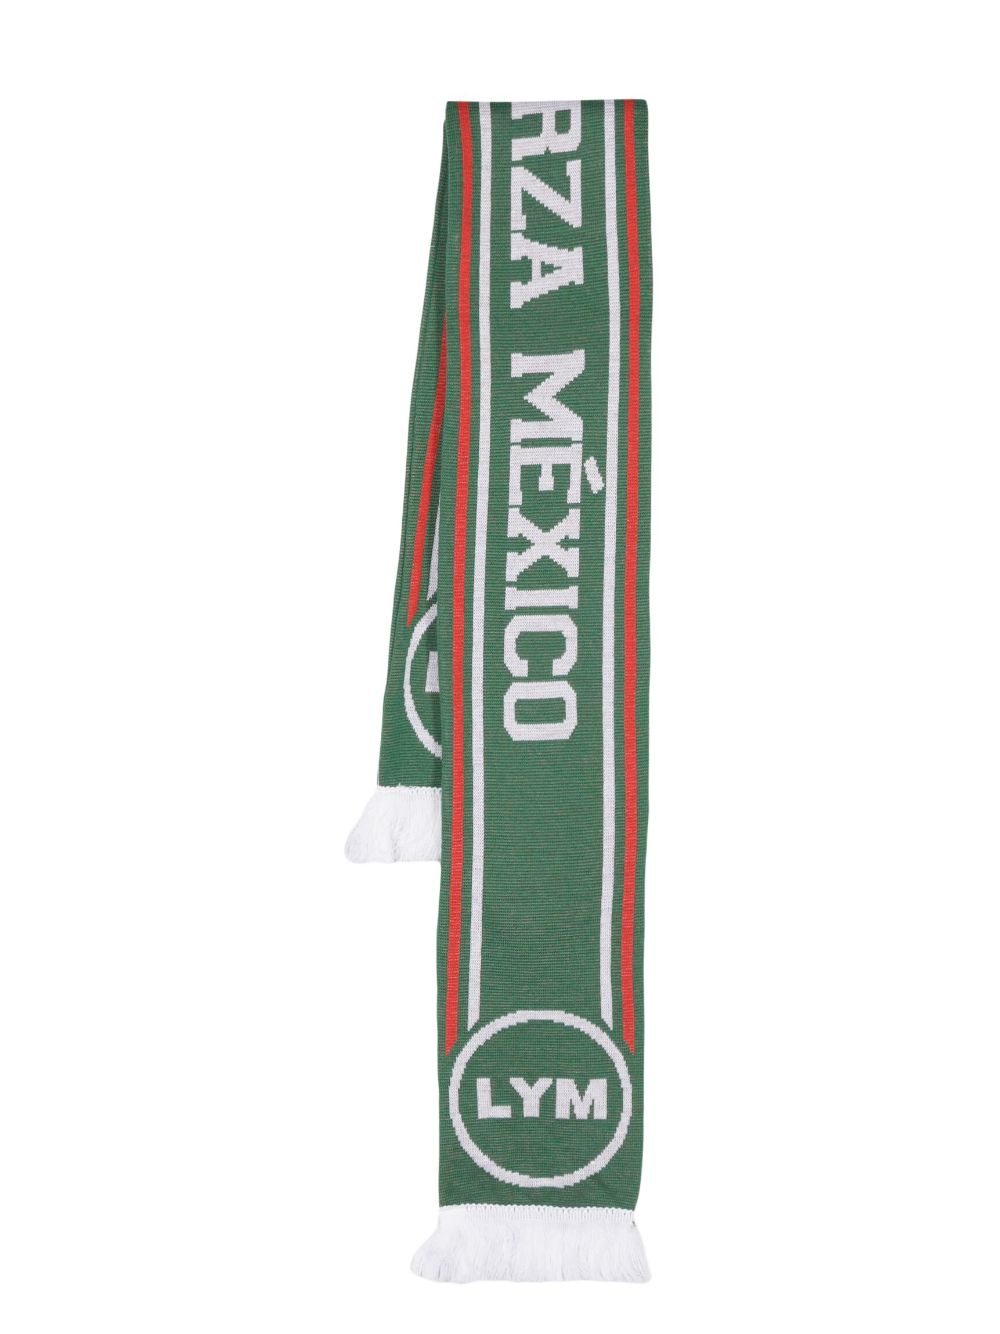 Liberal Youth Ministry jacquard football scarf - Green von Liberal Youth Ministry